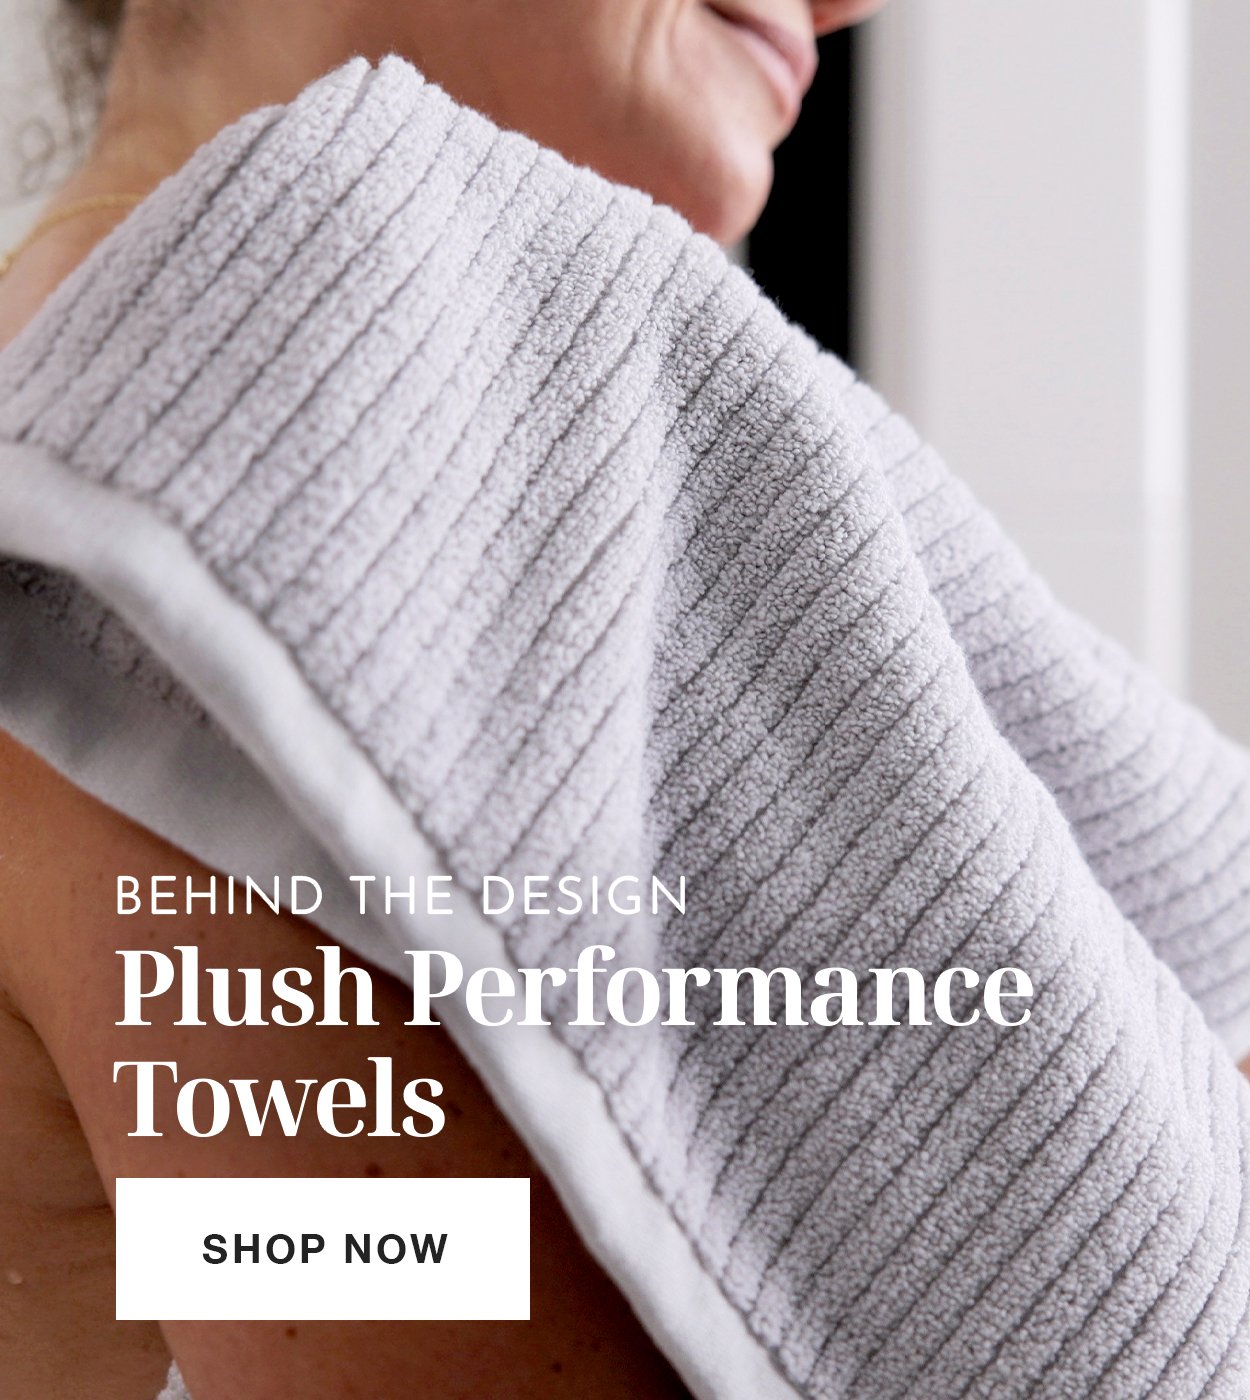 luxome: Behind the Design Plush Performance Towels >>>